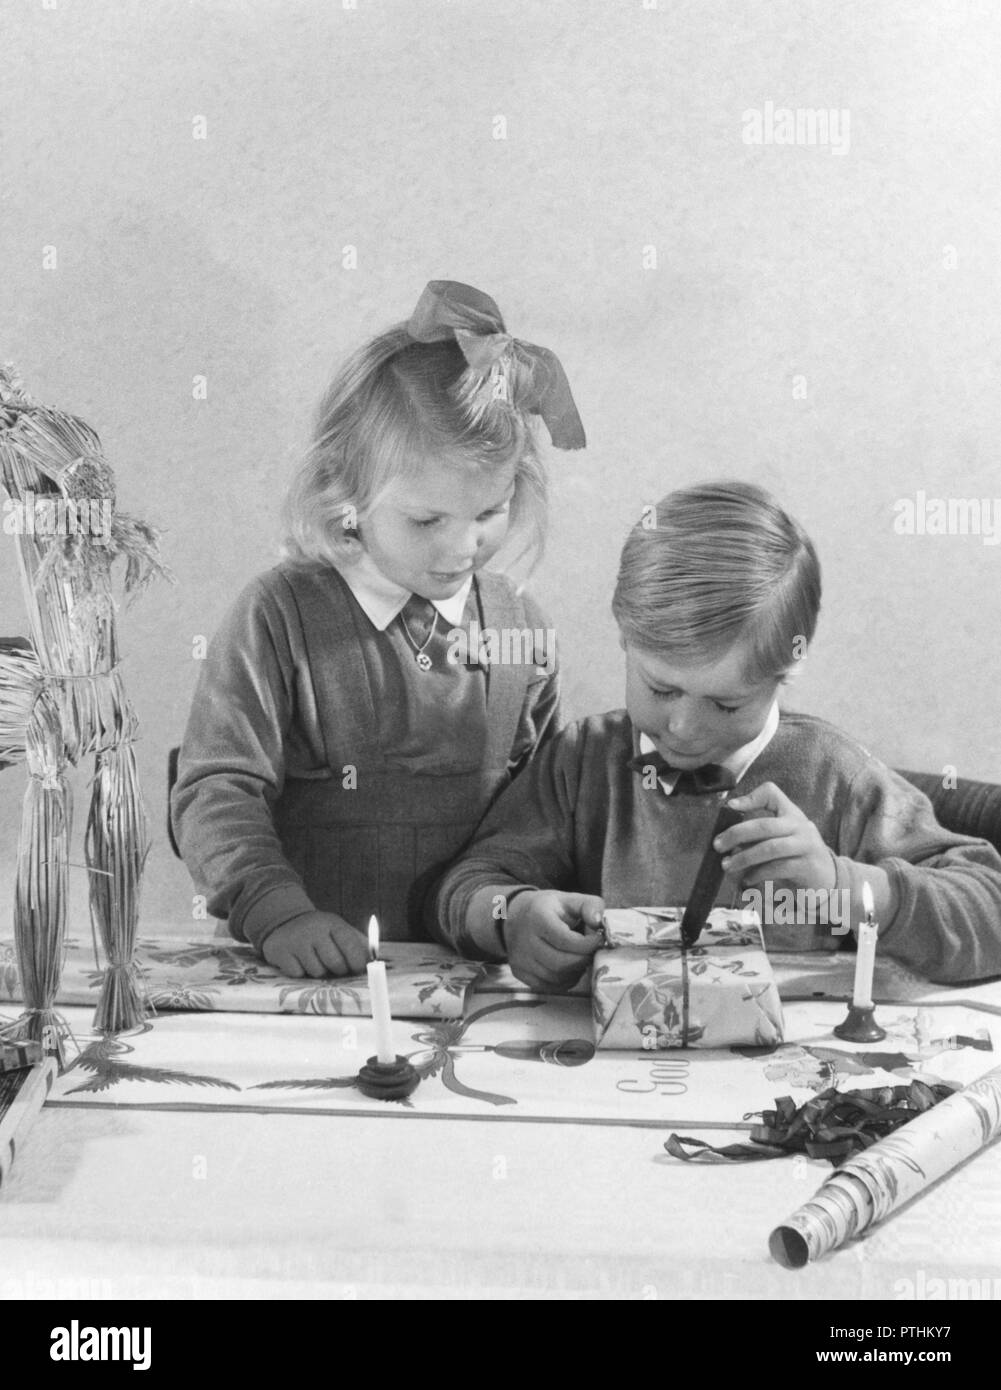 Christmas in the 1940s. Two well dressed children are wrapping christmas presents. The boy is melting wax and dripping it onto the gift package. Usually a stamp is put in the hot wax with the words Merry Christmas. Sweden 1940s Stock Photo